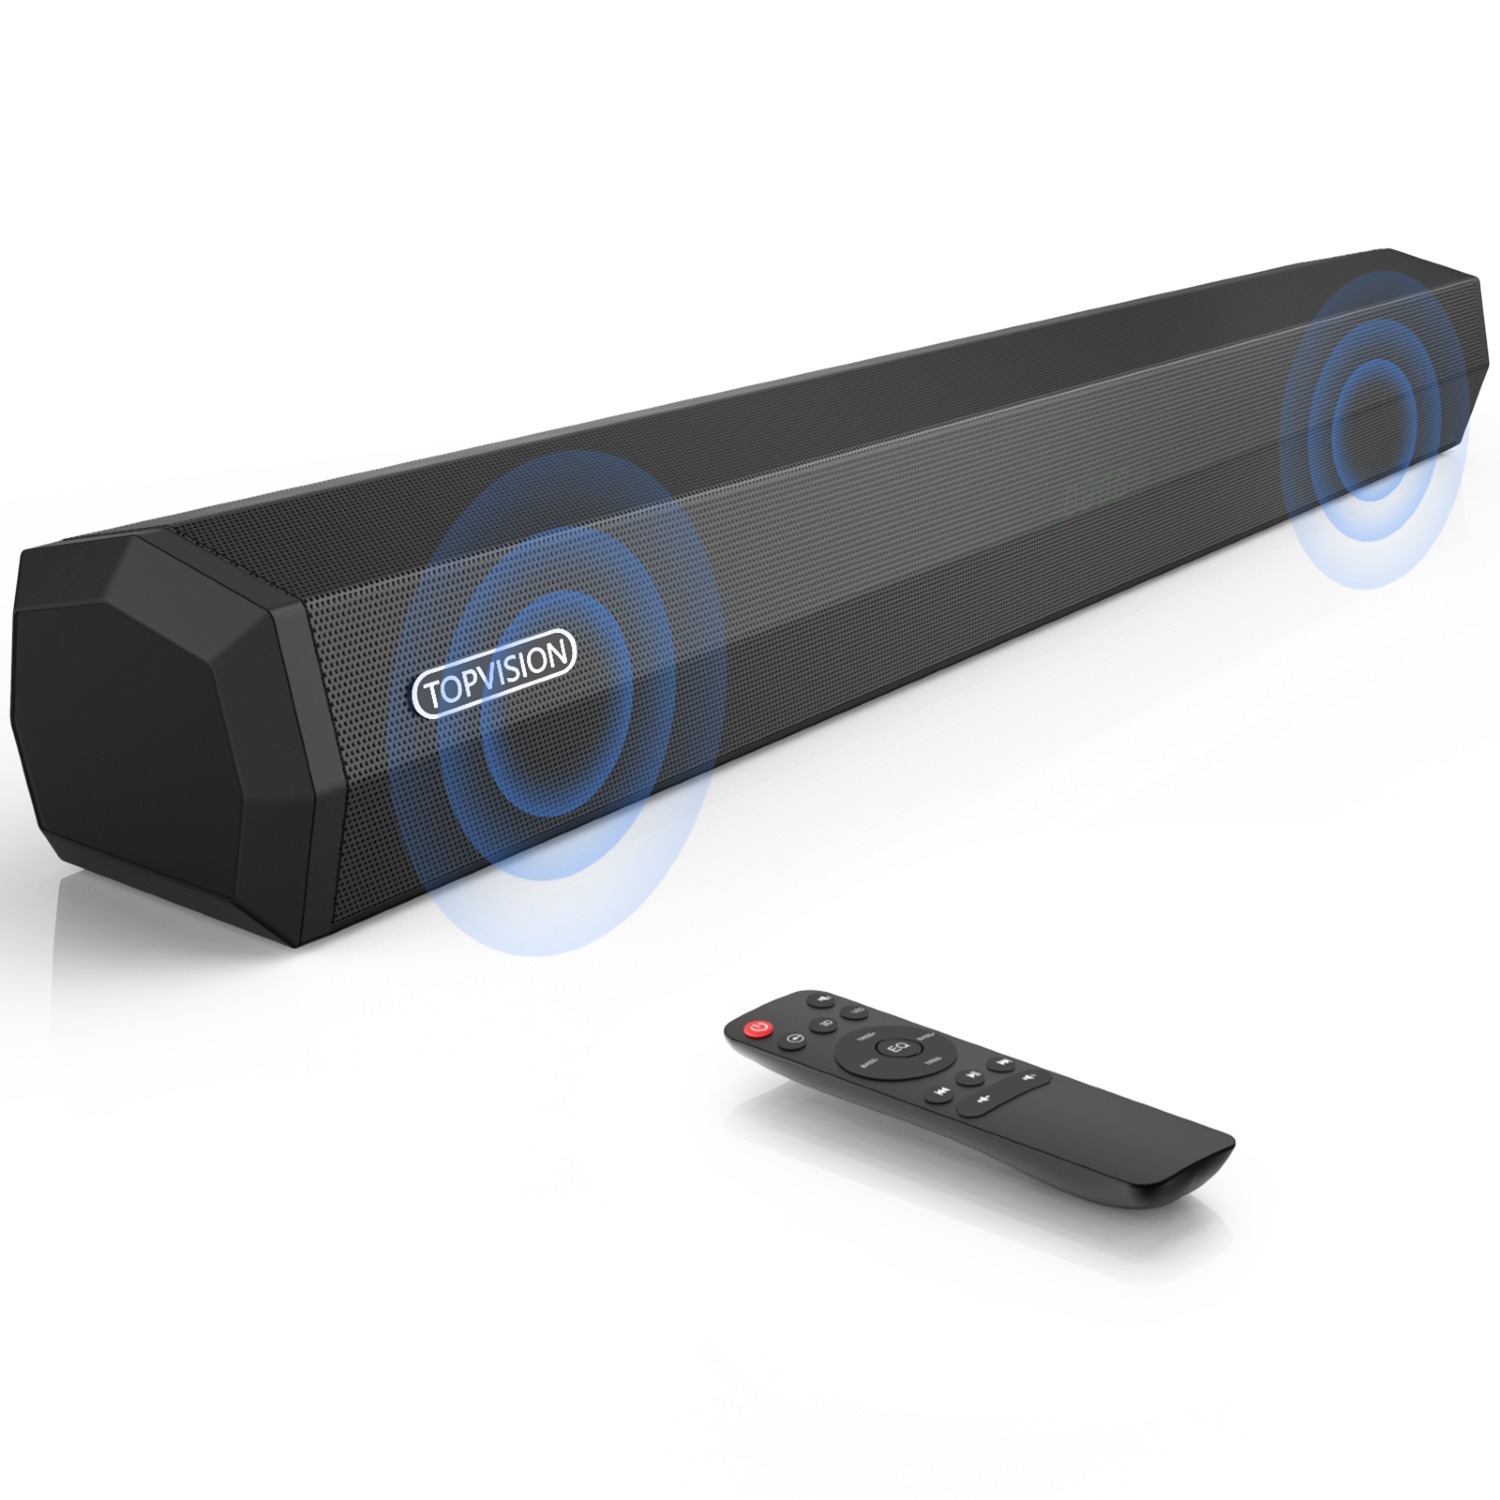 2.1-Channel TopVision 120W Sound Bar w/ Built-in Subwoofer $50 + Free Shipping